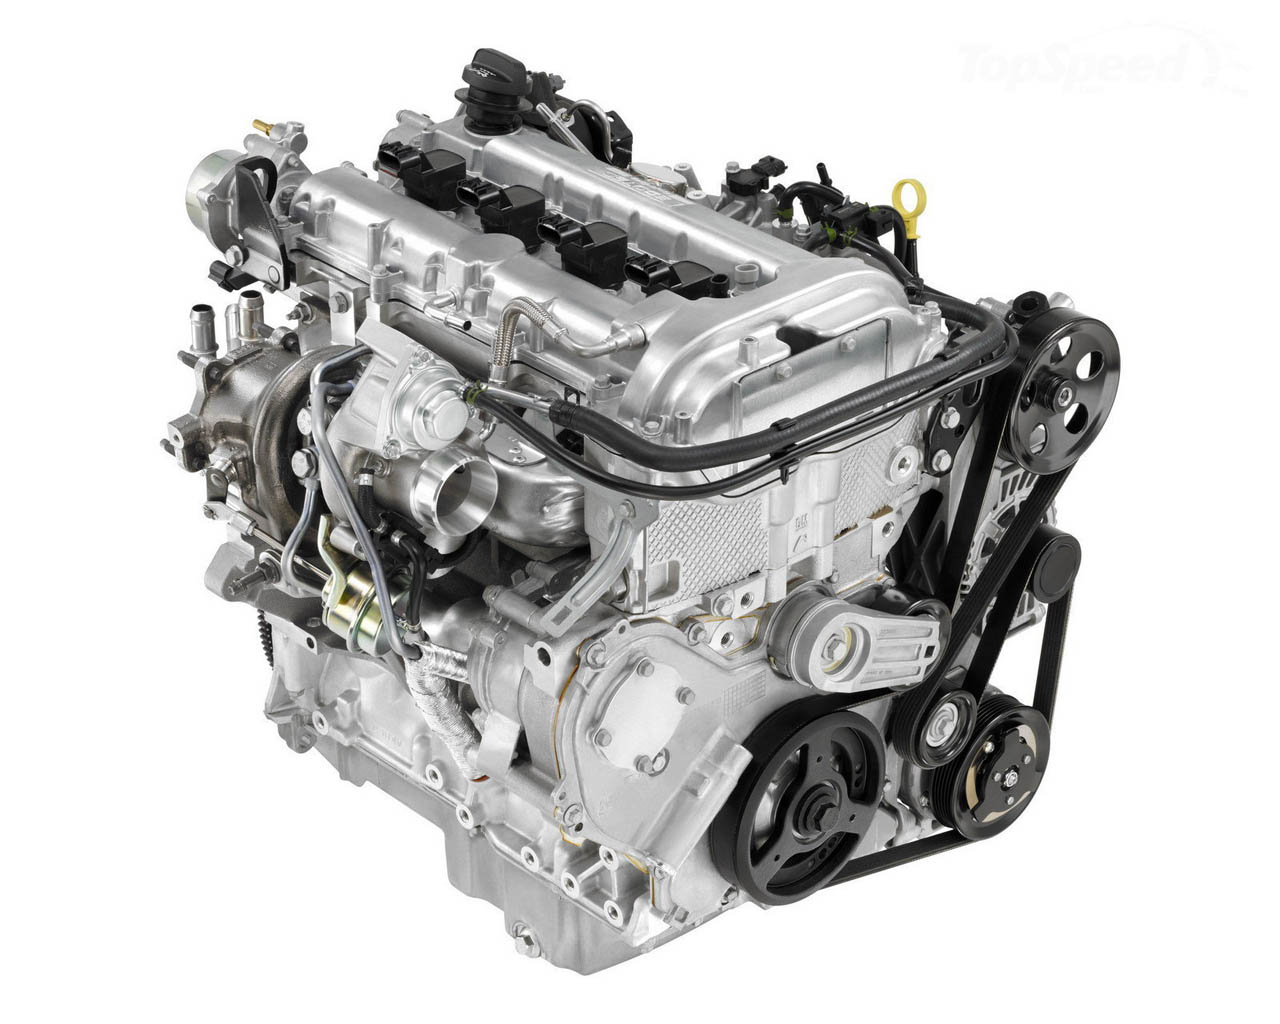 youngmanblog: Wards 2012 10 best engines